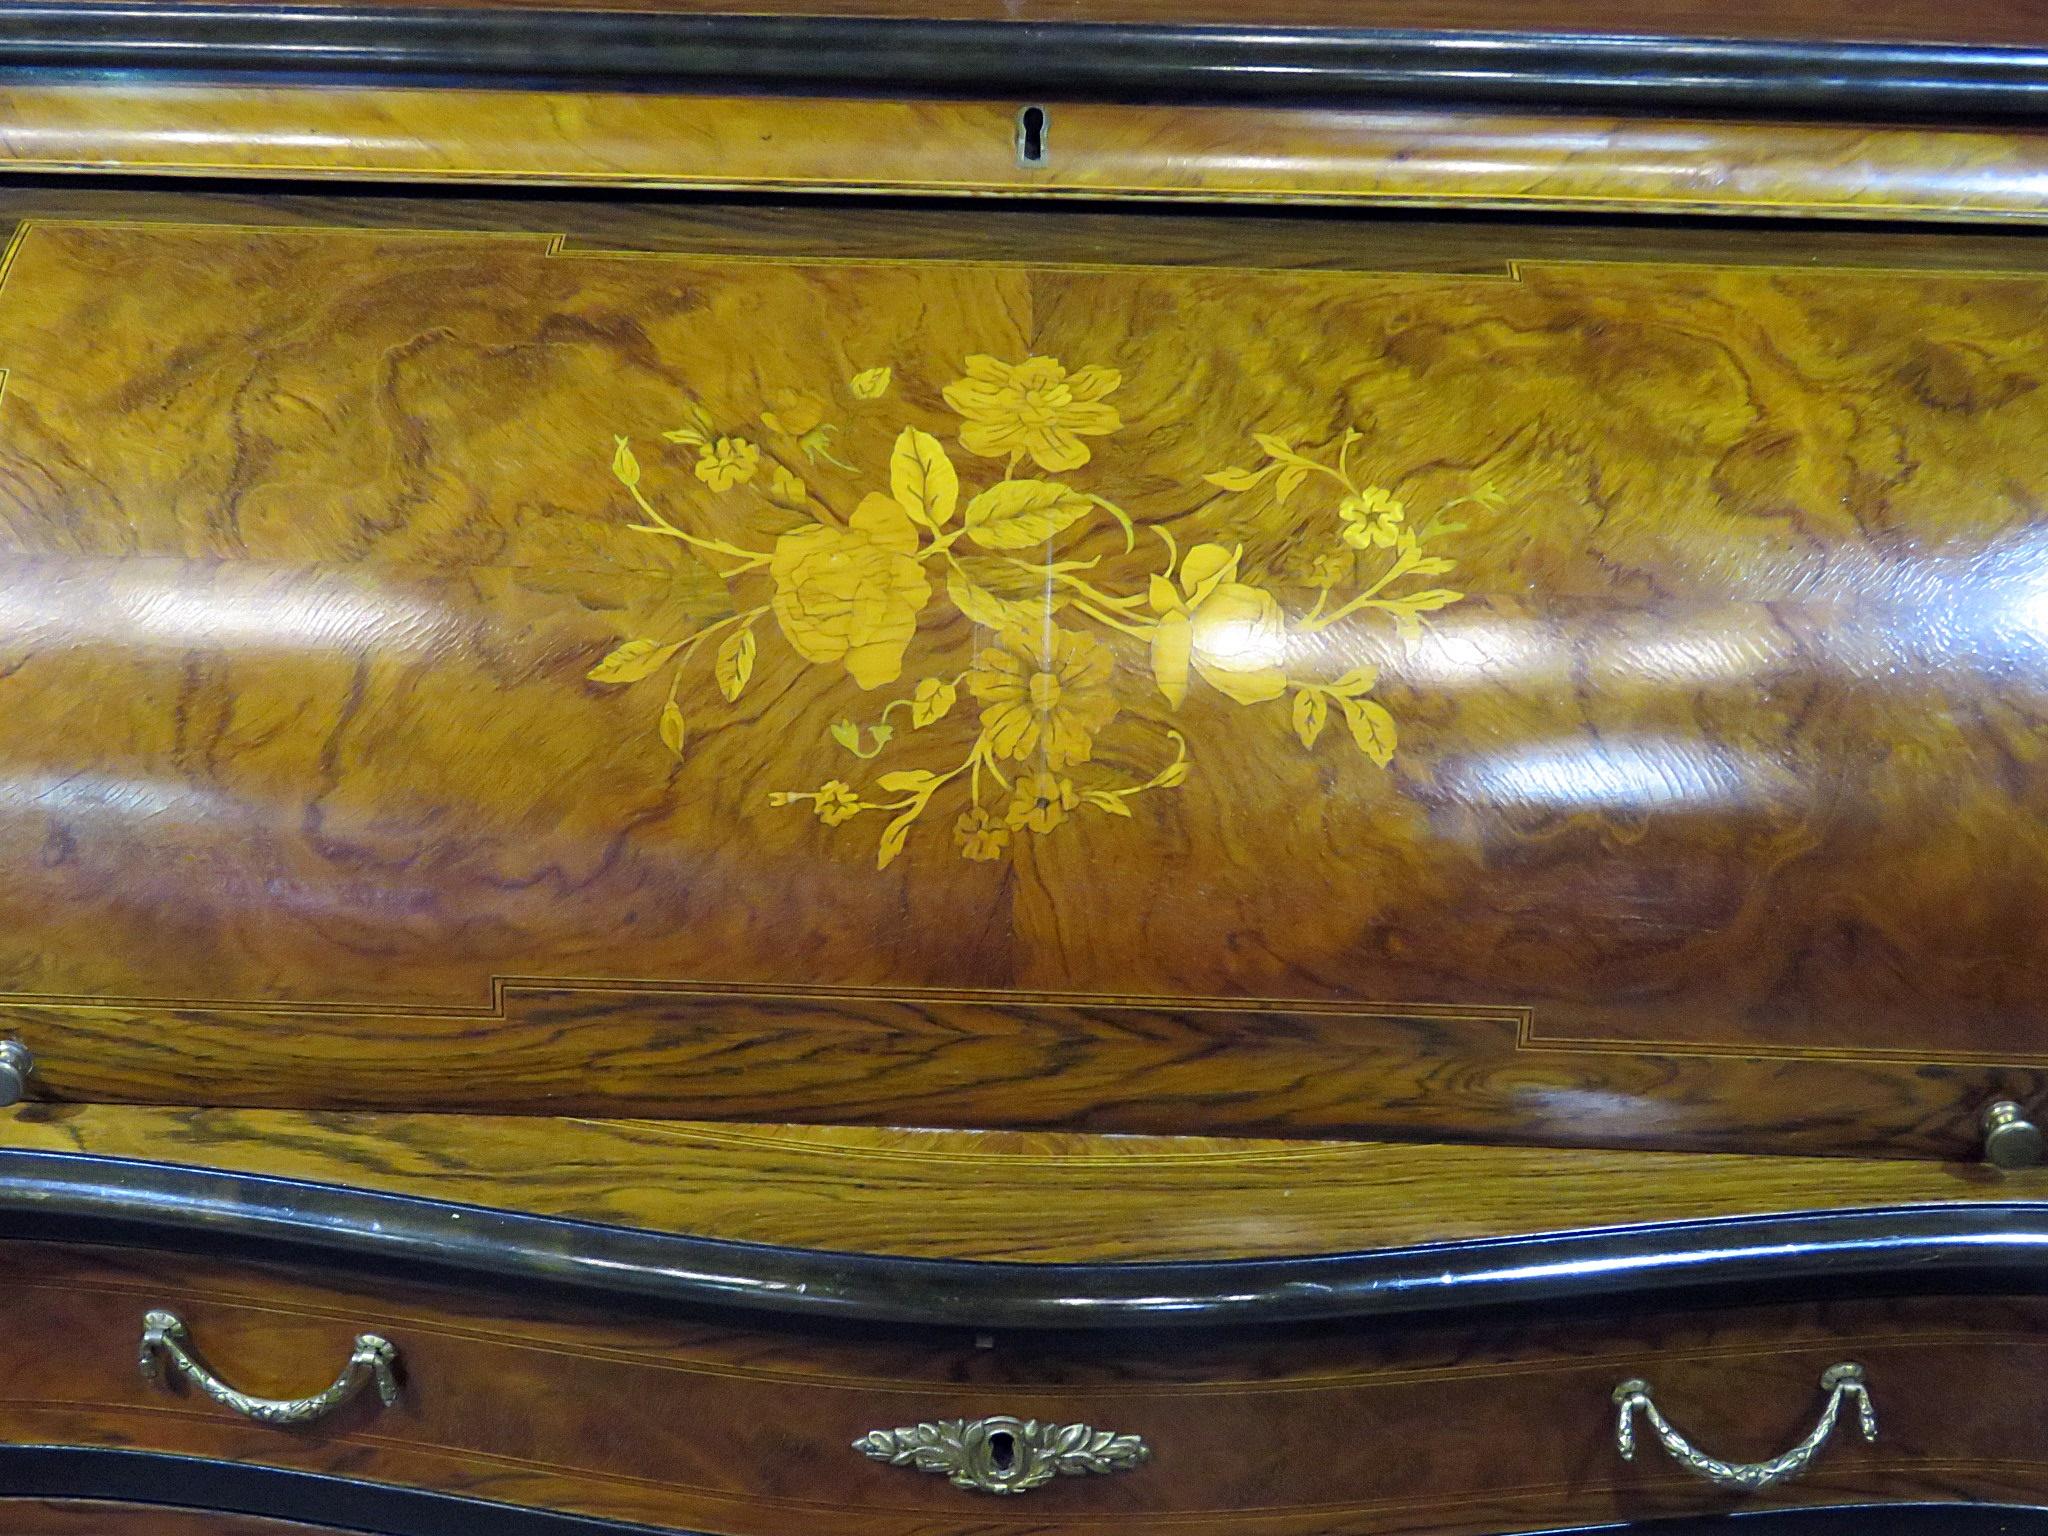 French-made (Danish retailed) inlaid cylinder desk with 4 drawers and storage on top over 4 drawers with brass accents. Incredible workmanship. This is not a Danish desk, just as Macy's sells Italian furniture, that doesn't make it American. The